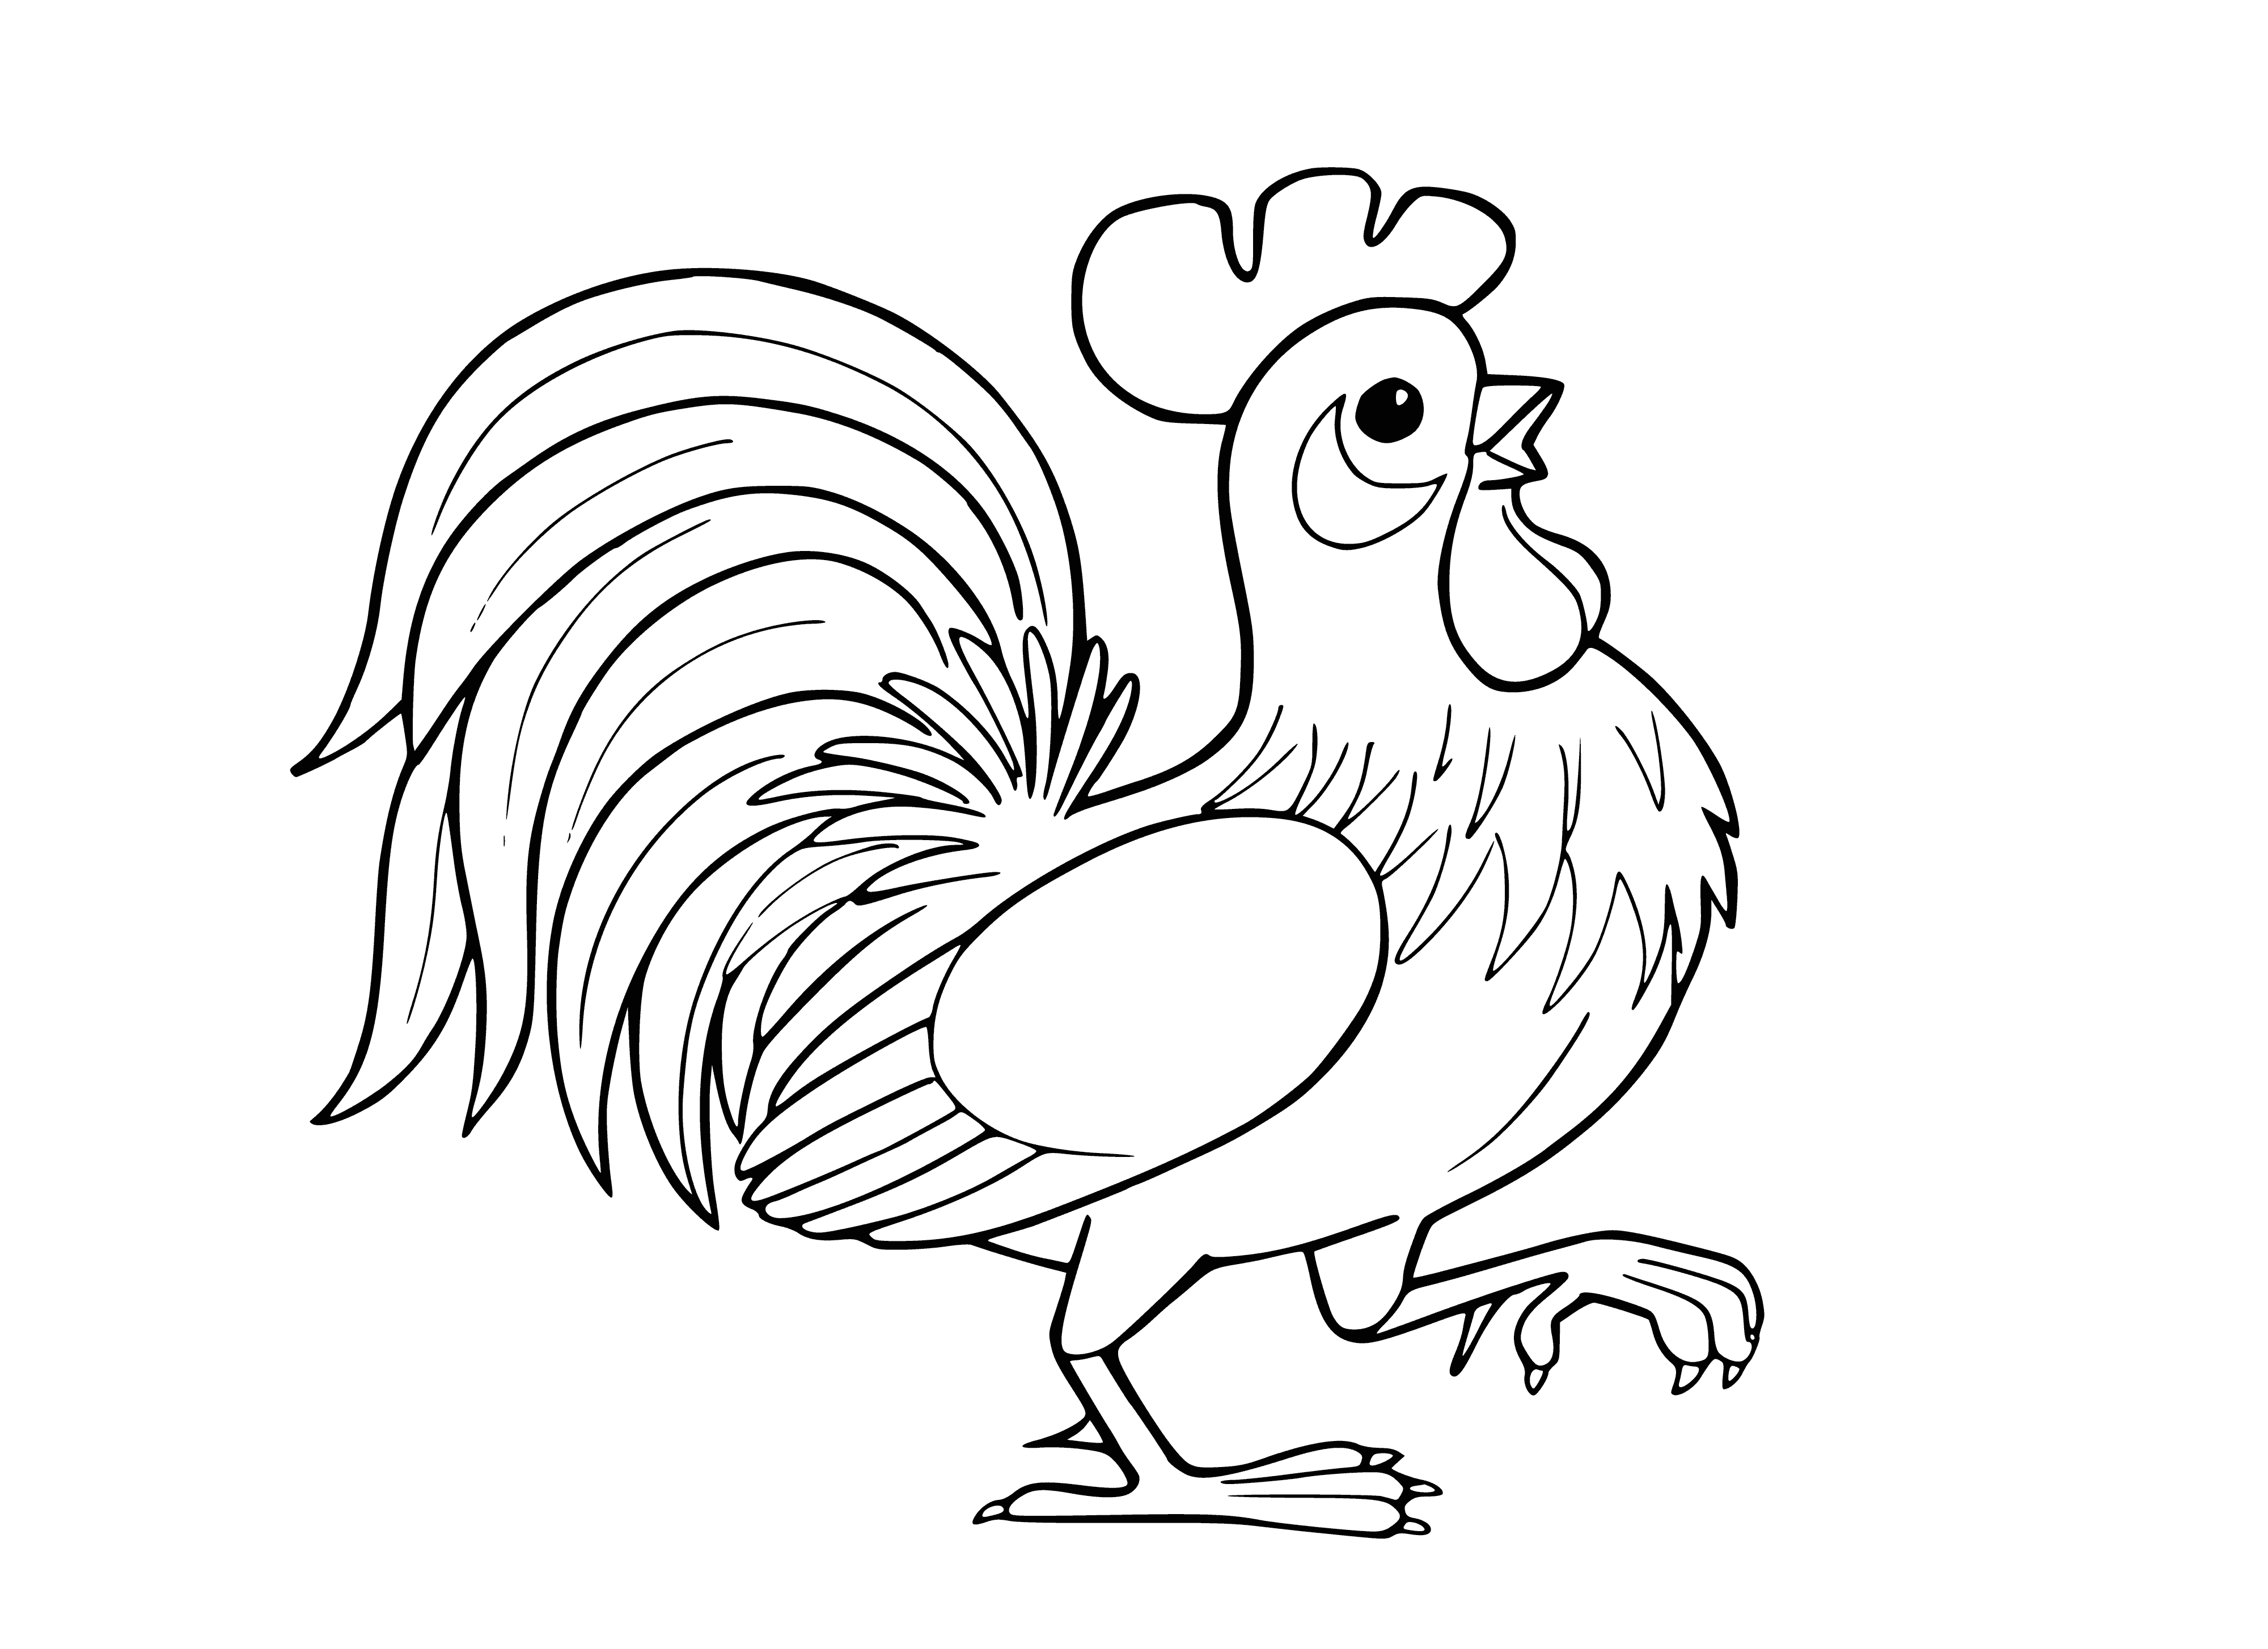 coloring page: Roosters are male chickens with long tails that crow loudly; they come in a variety of colors.